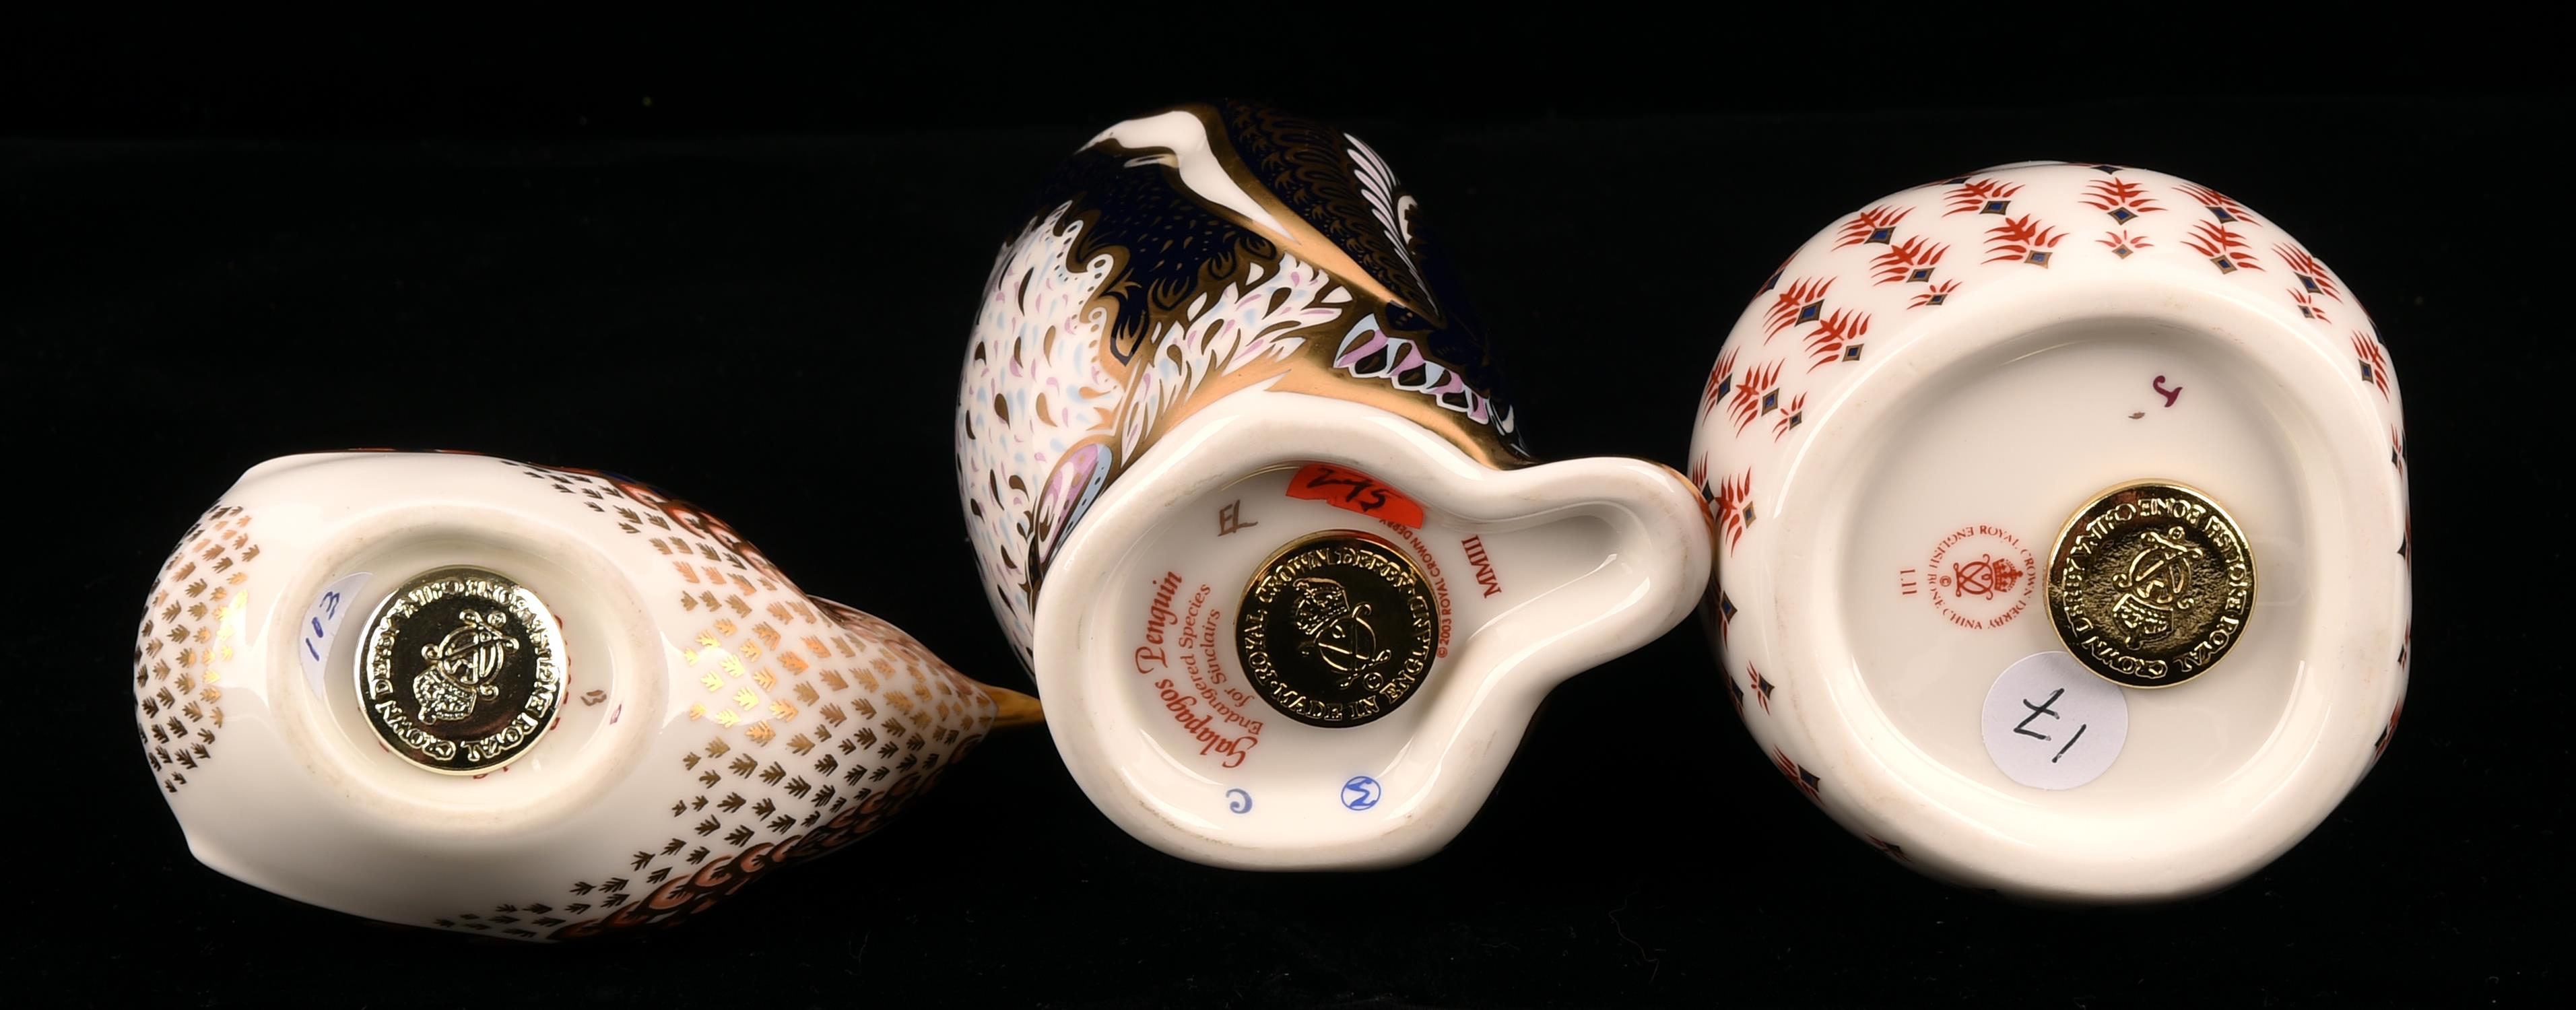 Royal Crown derby, Galapagos Penguin with gold stopper from the Sinclair's Endangered Species - Image 2 of 2